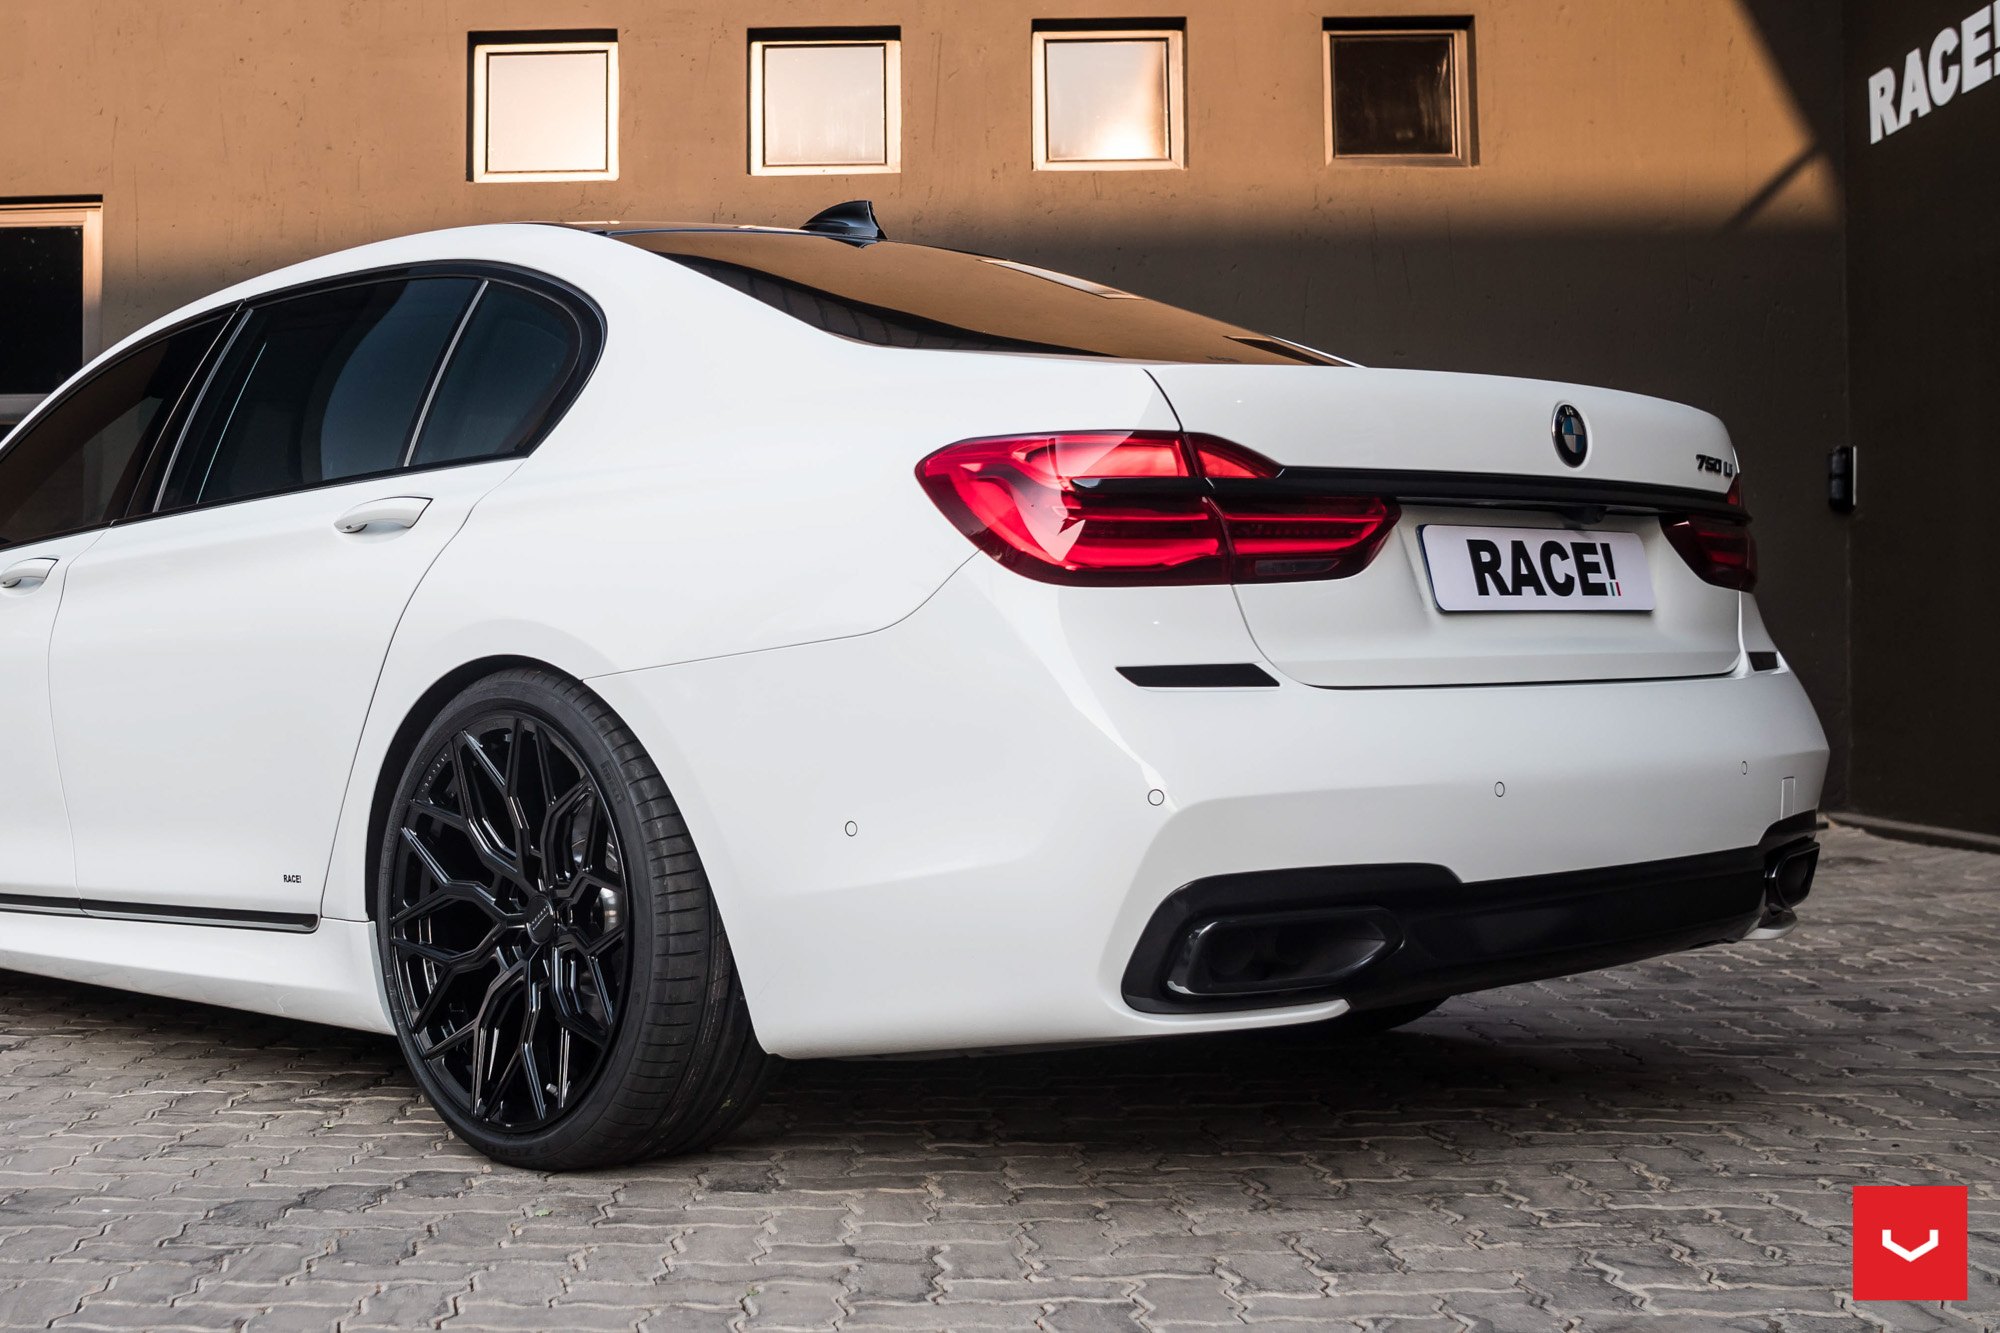 Custom Rear Diffuser on White BMW 7-Series - Photo by Vossen